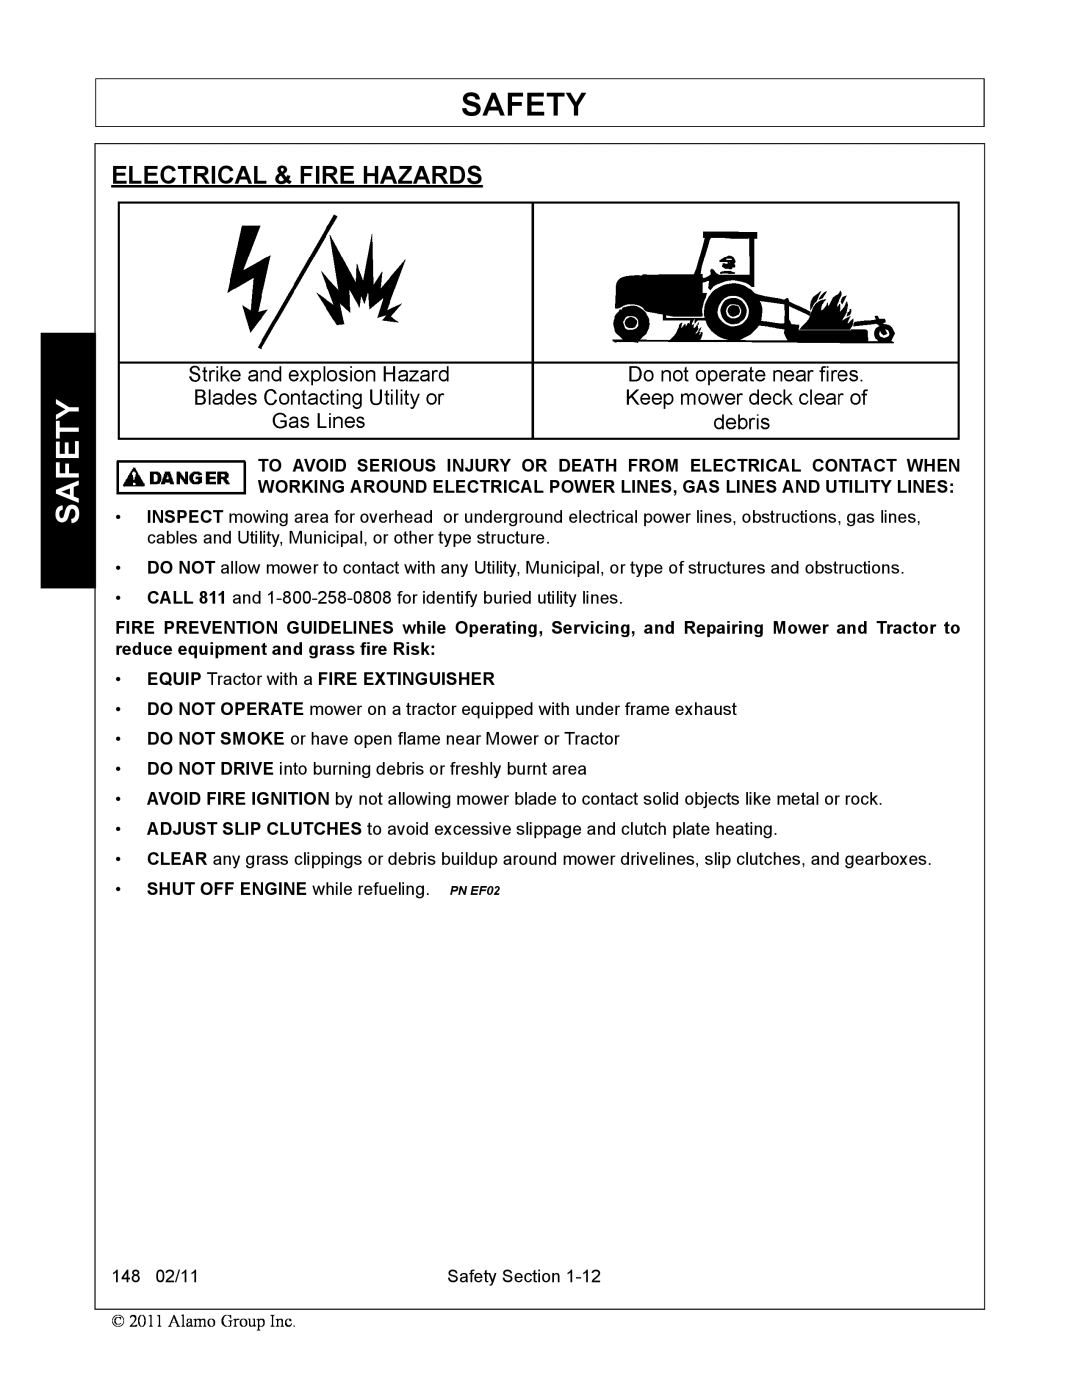 Rhino Mounts 148 manual Electrical & Fire Hazards, Safety, EQUIP Tractor with a FIRE EXTINGUISHER 